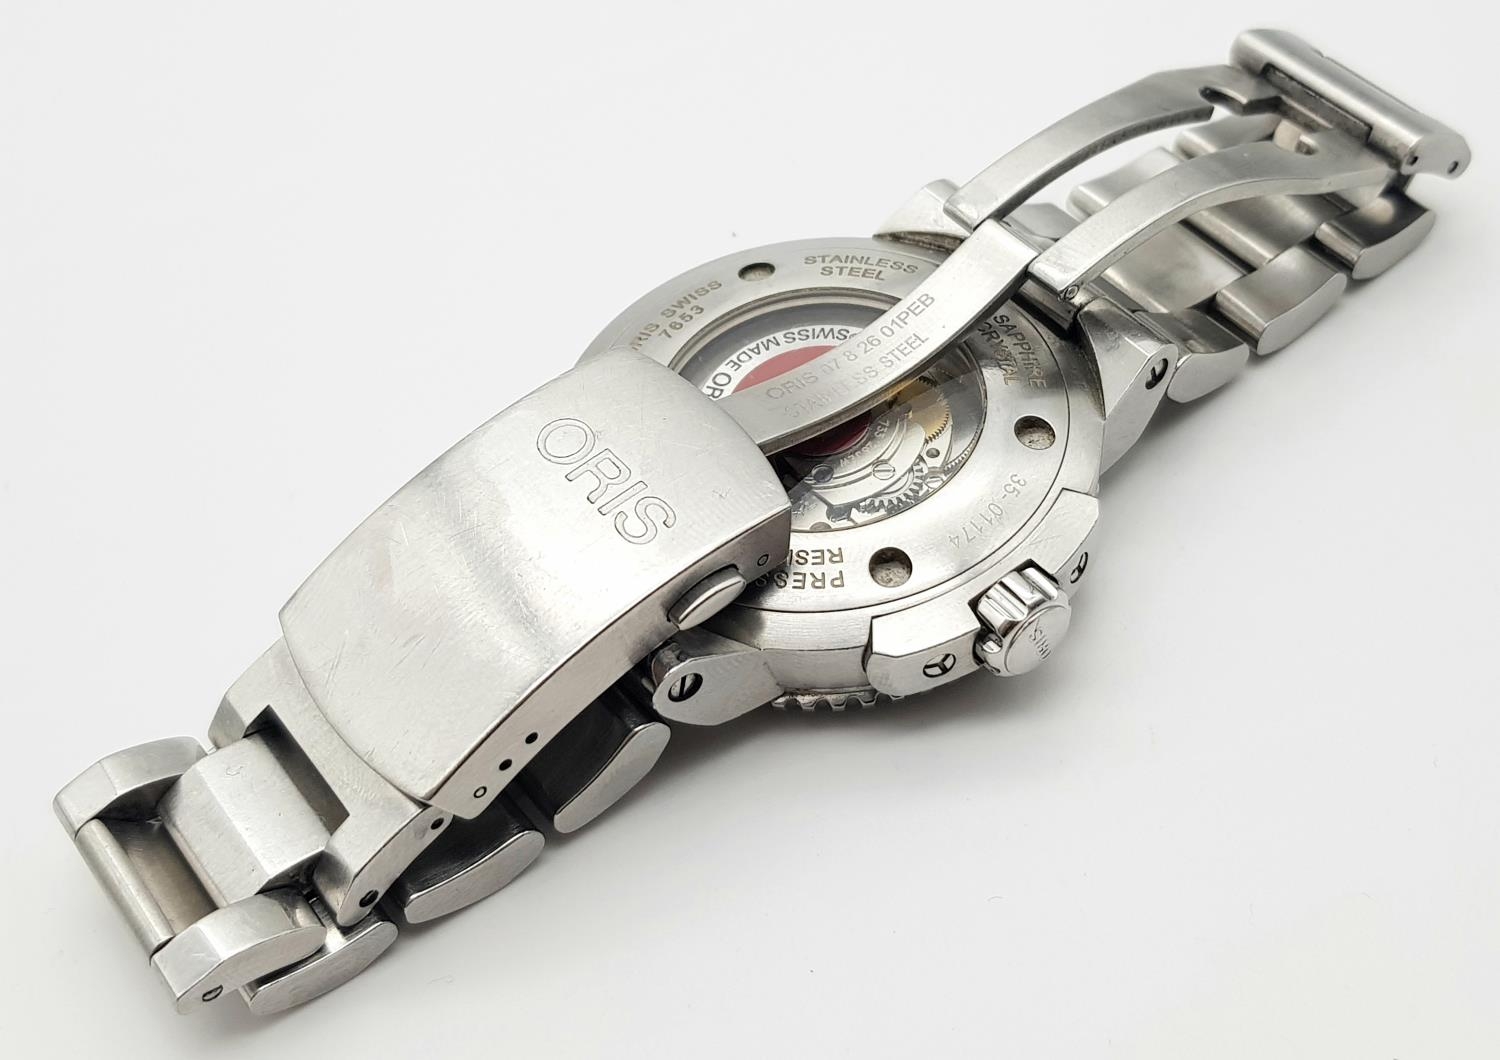 An Oris Automatic Divers Watch. Pressure resistant to 300M - Model 7653. Stainless steel bracelet - Image 6 of 8